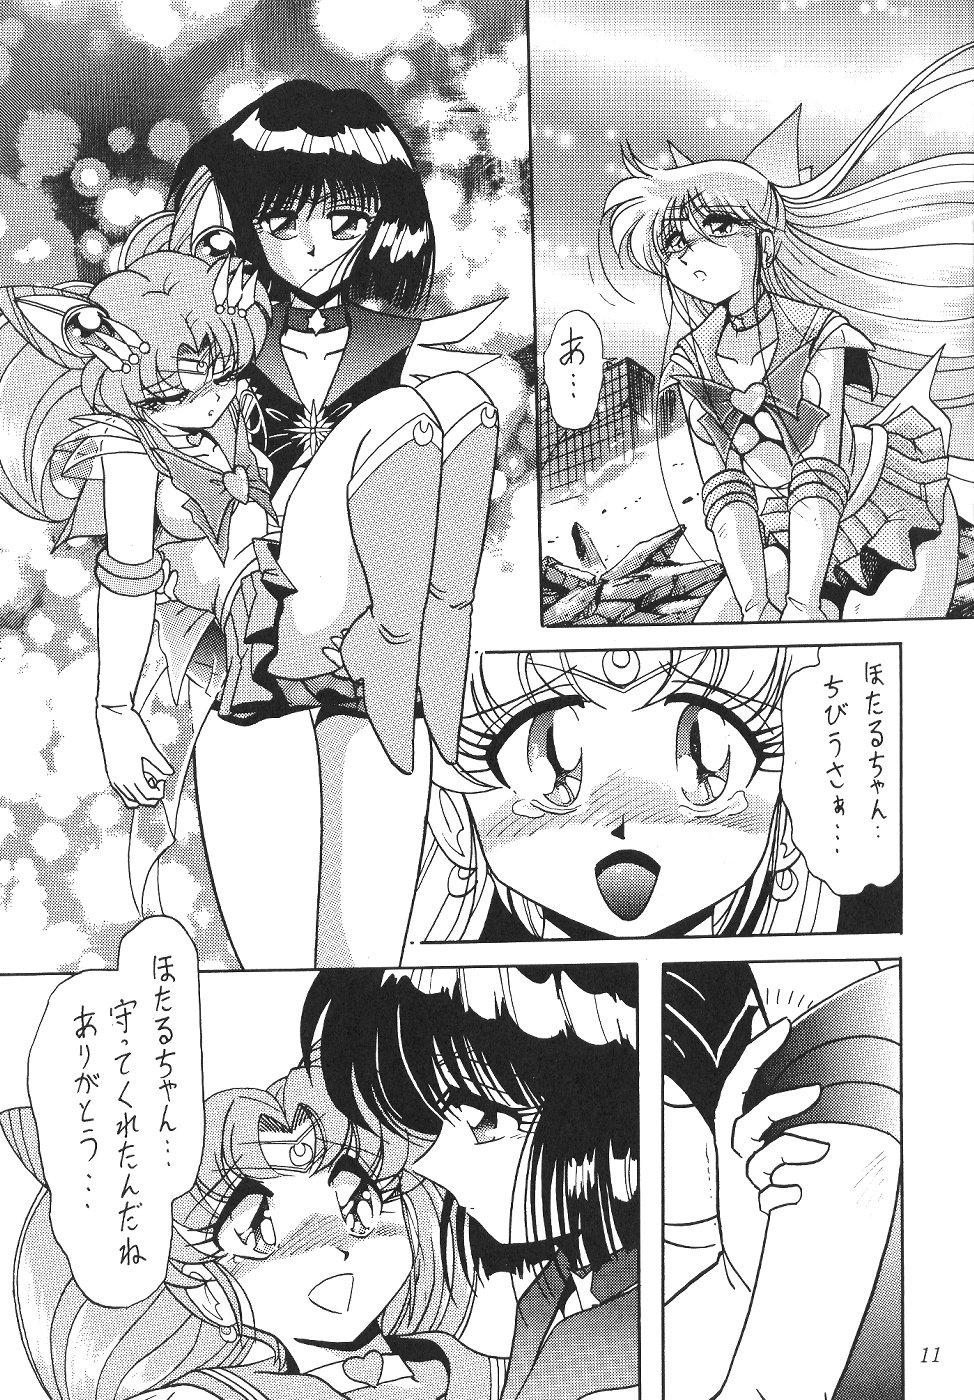 Fuck Silent Saturn 11 - Sailor moon Bed - Page 11